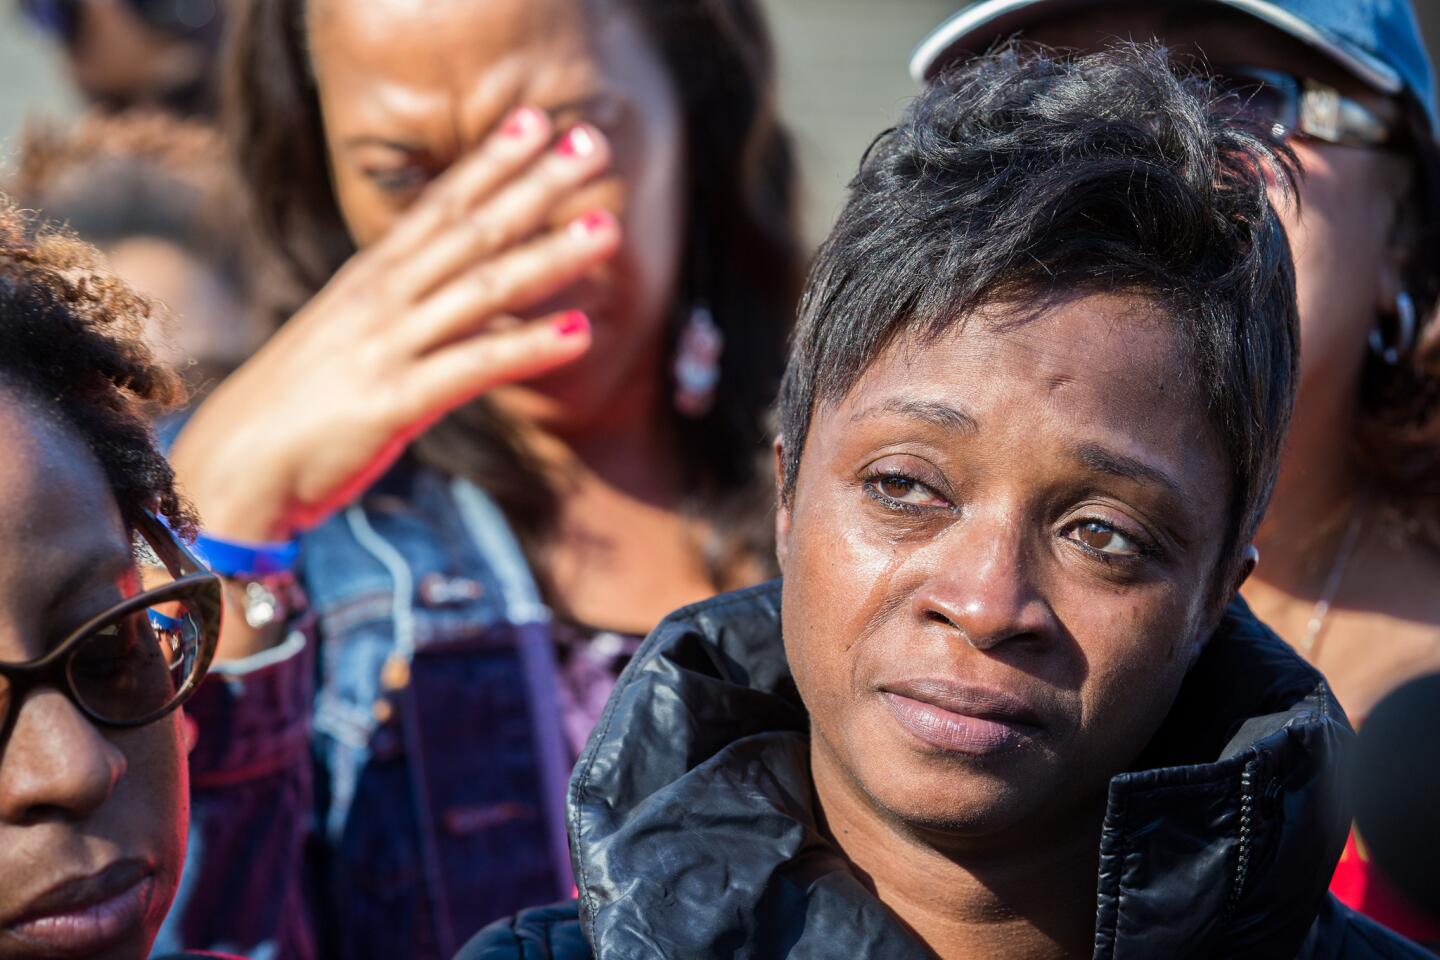 Tanesha Reed, the mother of slain Demarius Reed gets emotional on Nov. 3, 2015, as the Rev. Michael Pfleger talks at the site where Tyshawn Lee, 9, was fatally shot in Gresham neighborhood the day before. Demarius Reed, 21, was found shot to death on Oct. 18, 2013.